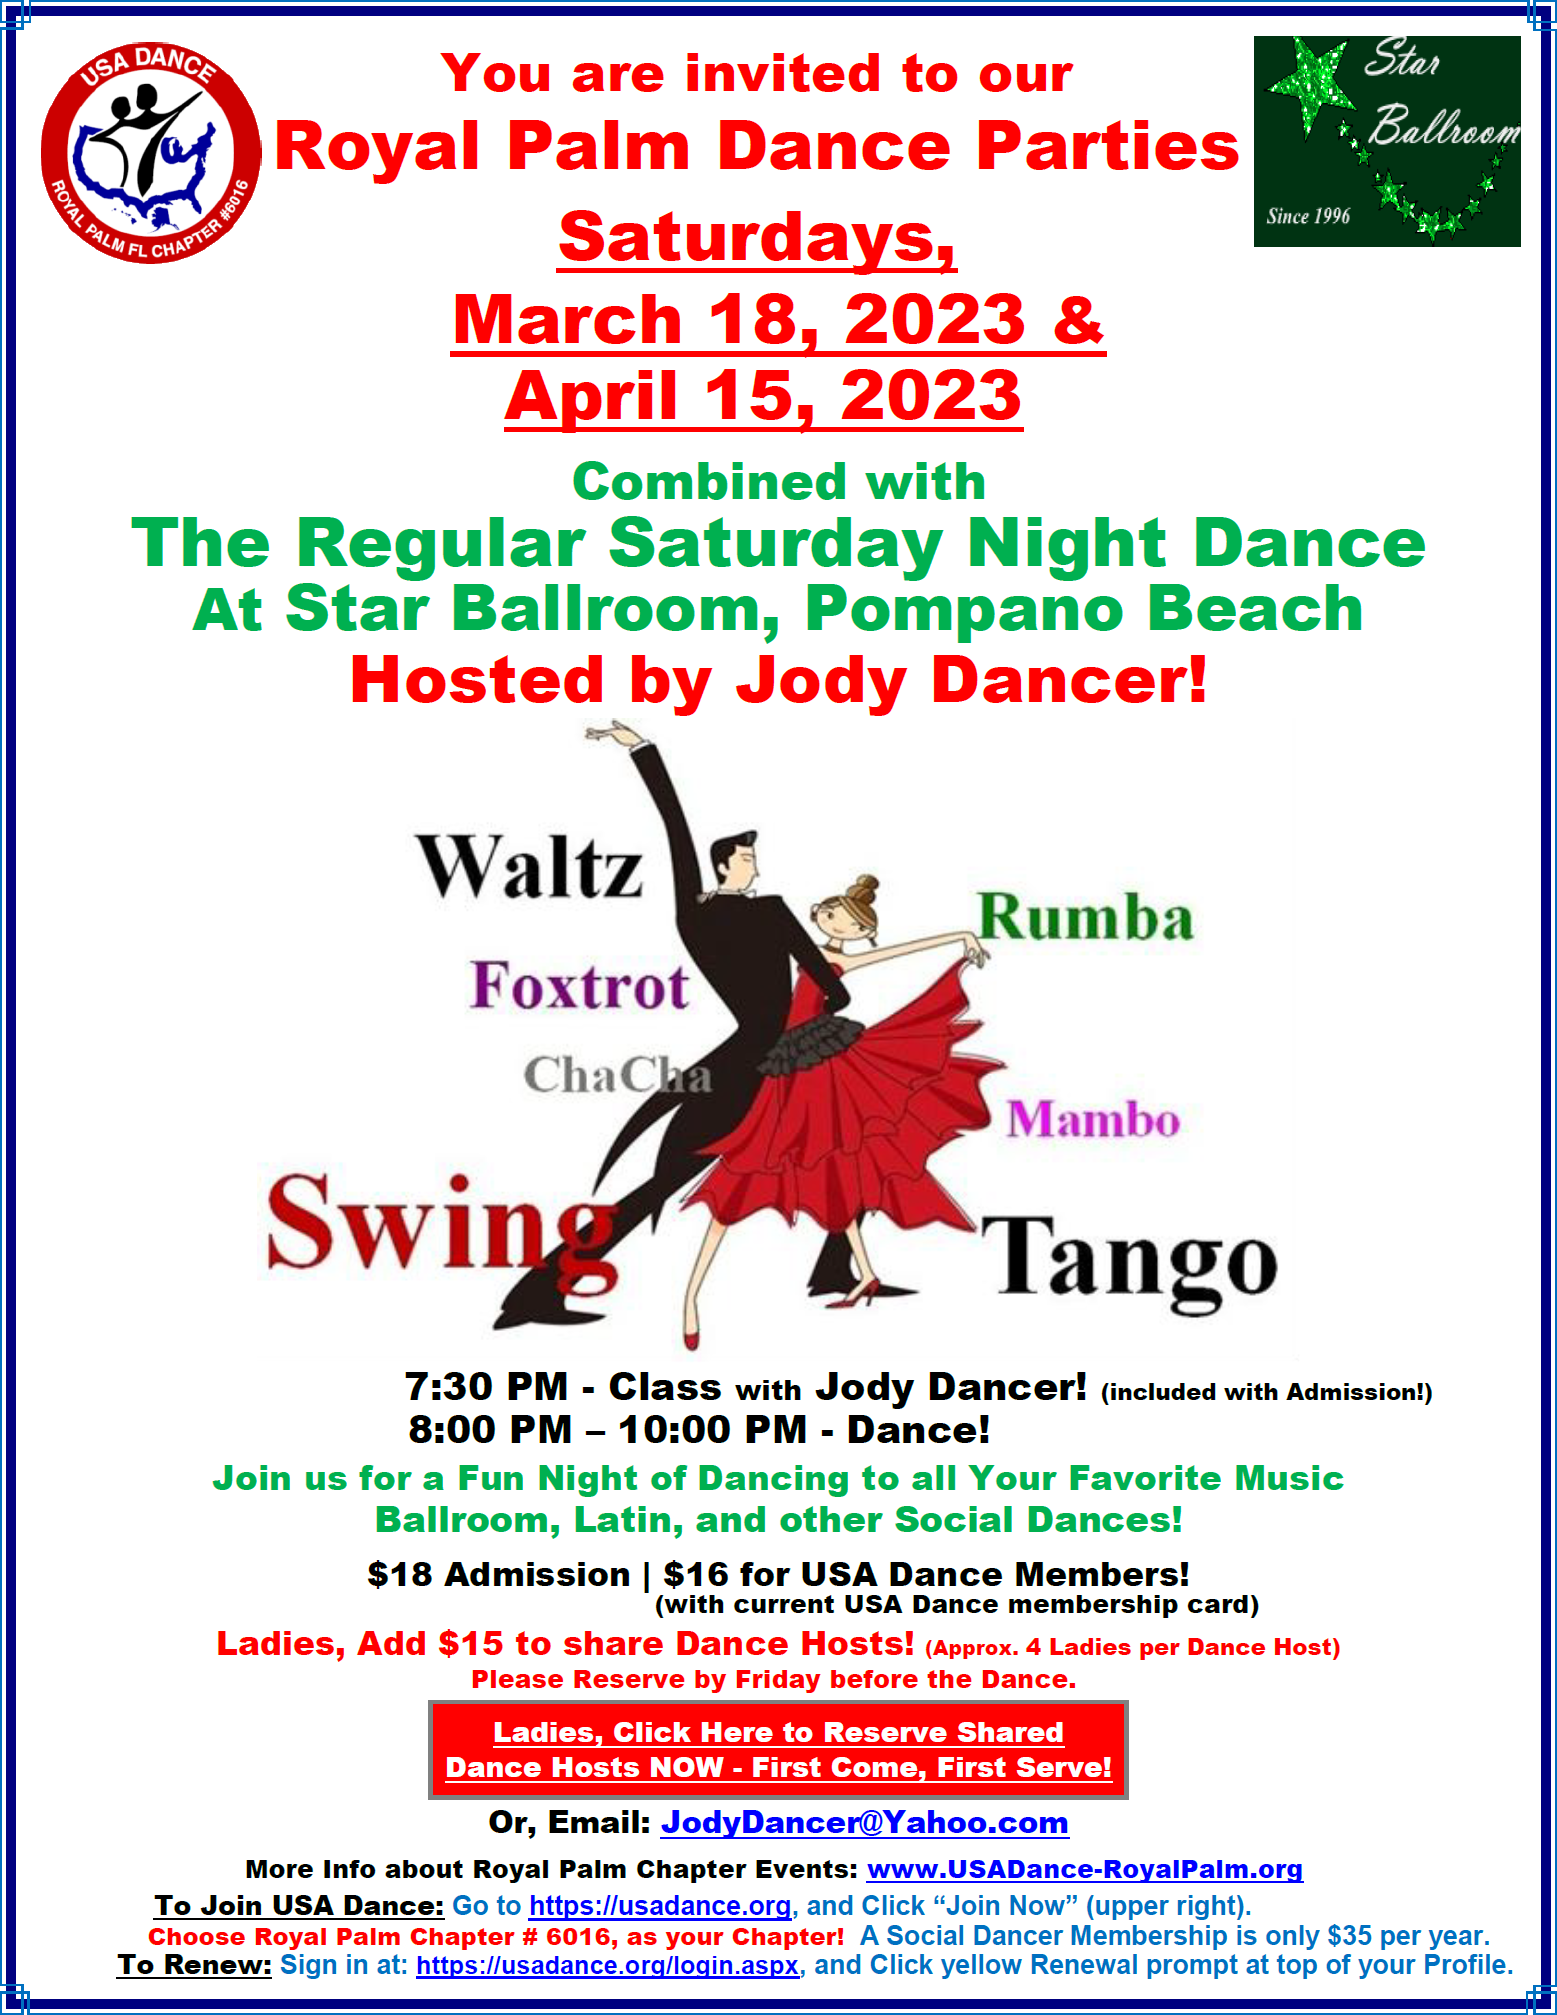 Royal Palm Chapter Dances - March 18 and April 15, 2023 - at Star Ballroom, Pompano Beach